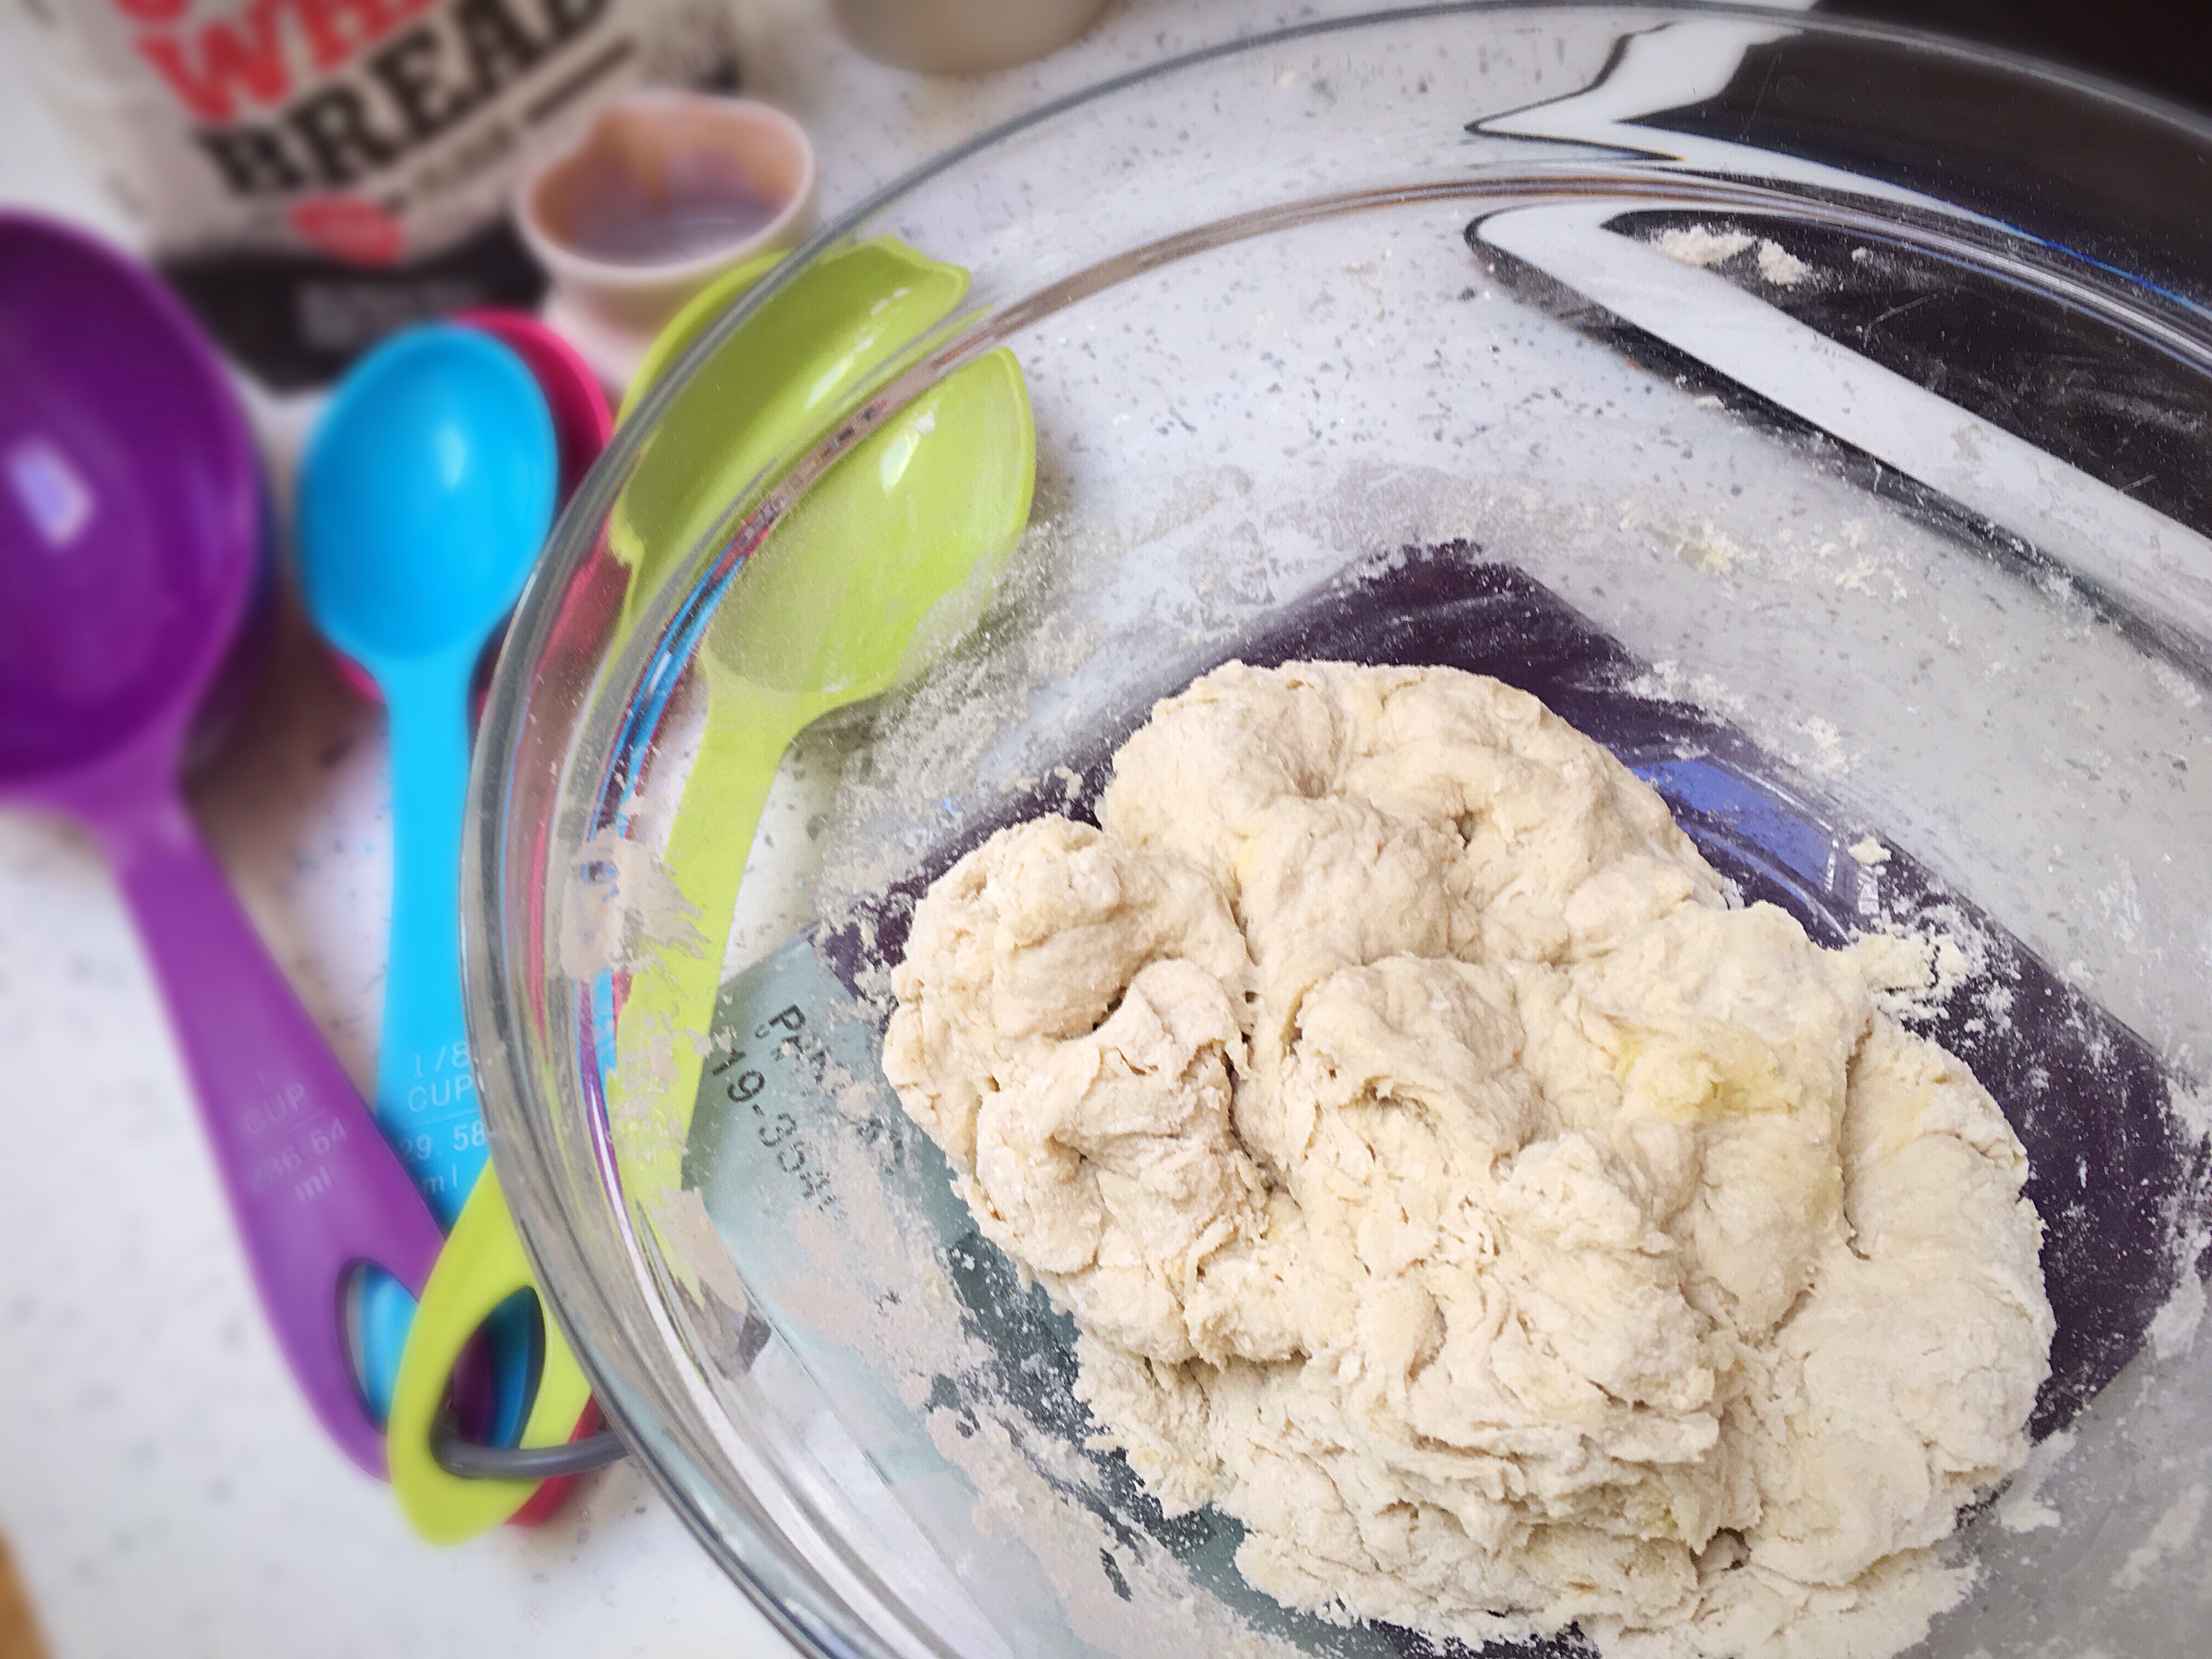 A bowl of dough is sitting on the table.